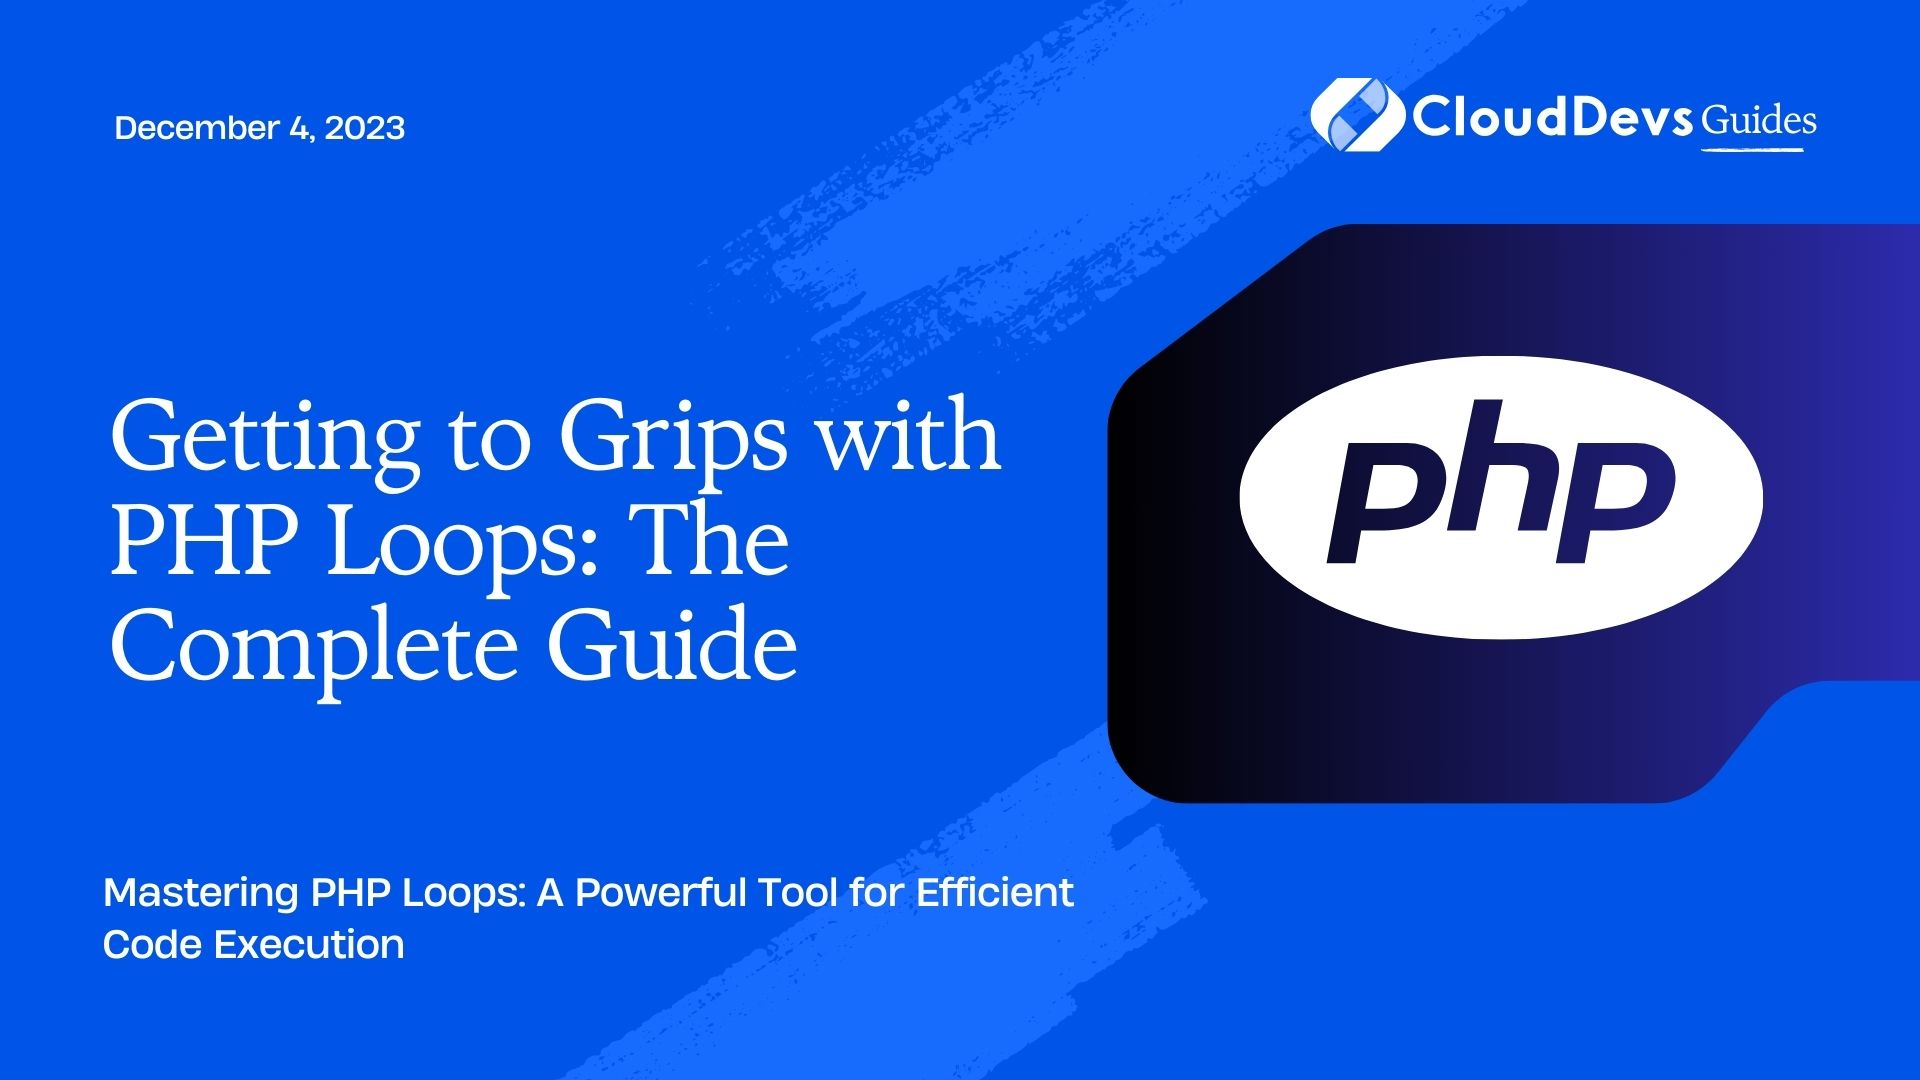 Getting to Grips with PHP Loops: The Complete Guide